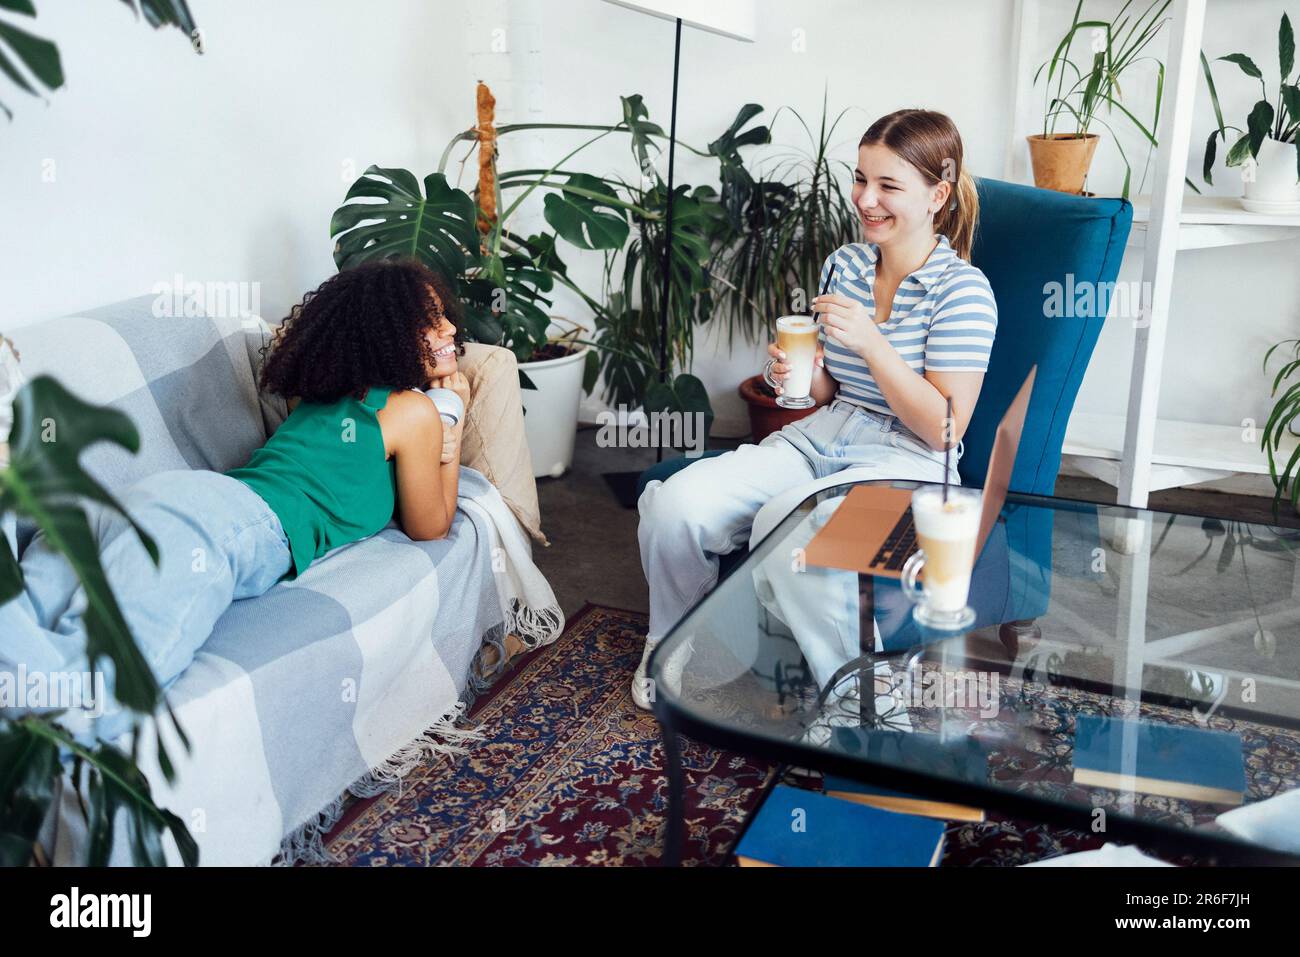 Cute multiracial teenagers drink cappuccino and chat. Teen girls have good time together and watch movie on laptop. Smiling female friends having fun Stock Photo